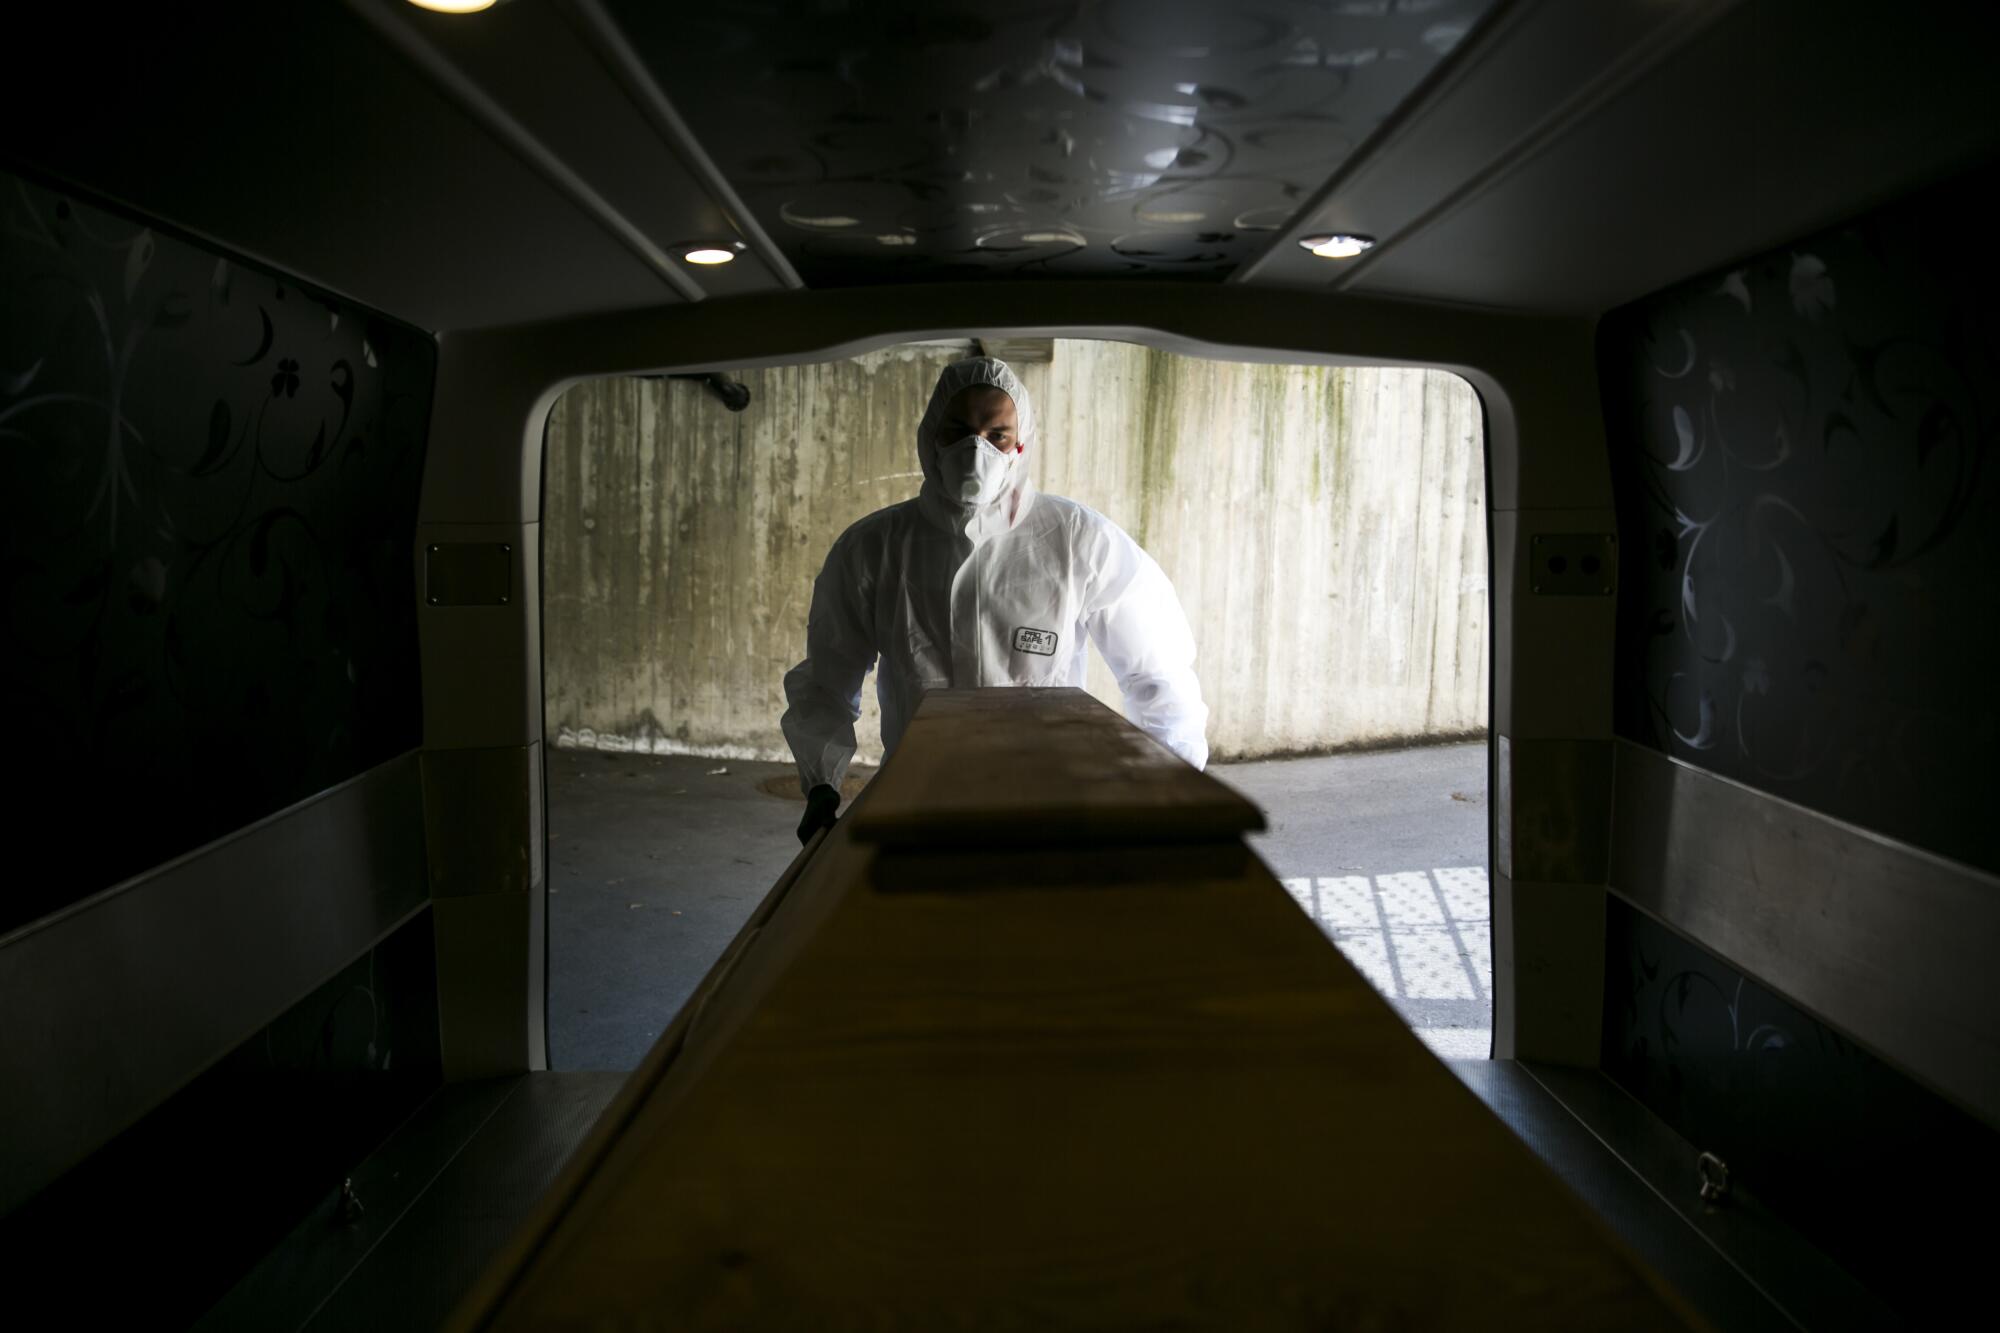 An undertaker in full protective clothing pushes a coffin into a mortuary van.